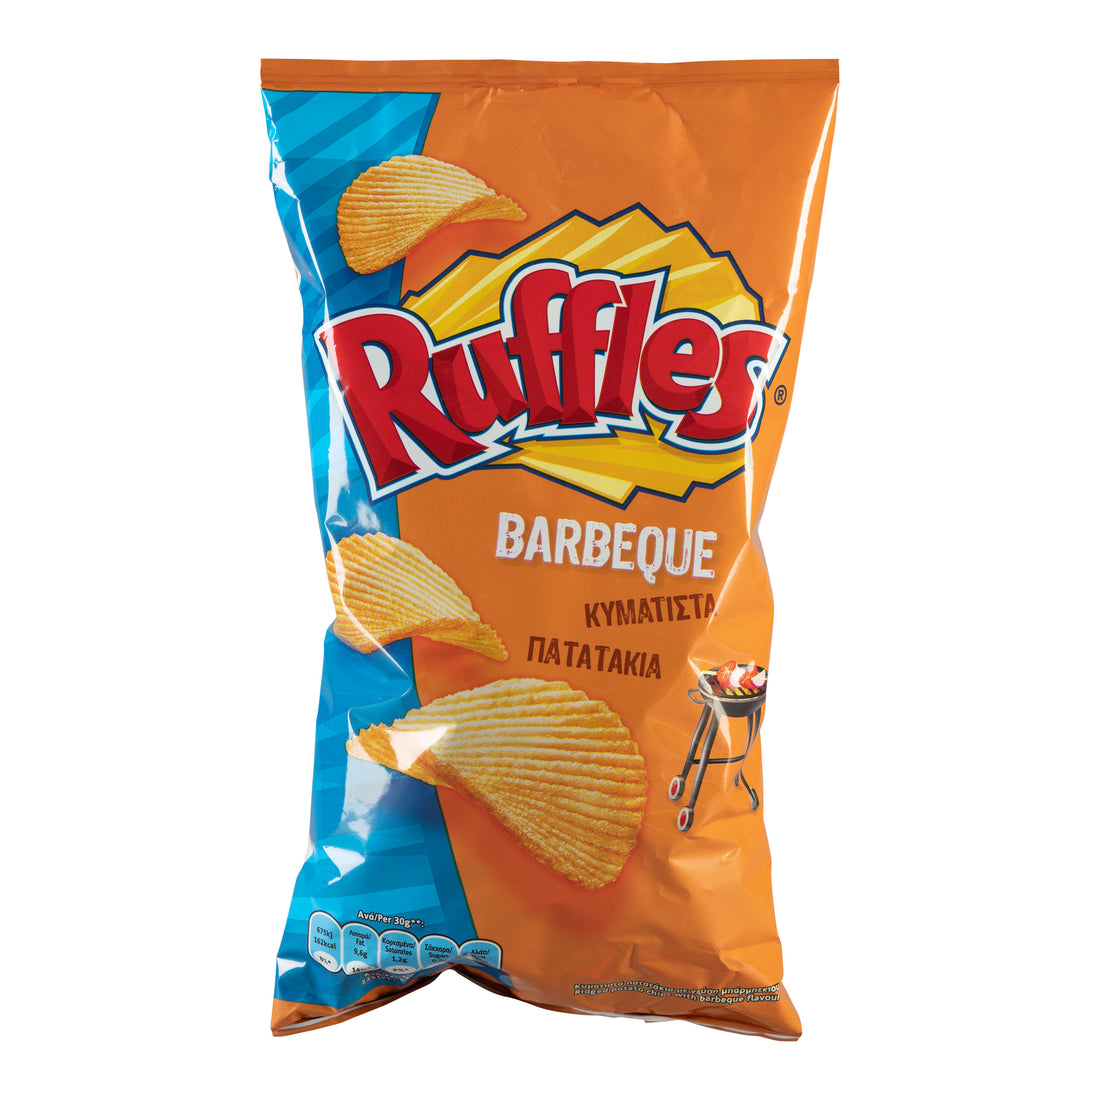 Ruffles Barbeque 105g